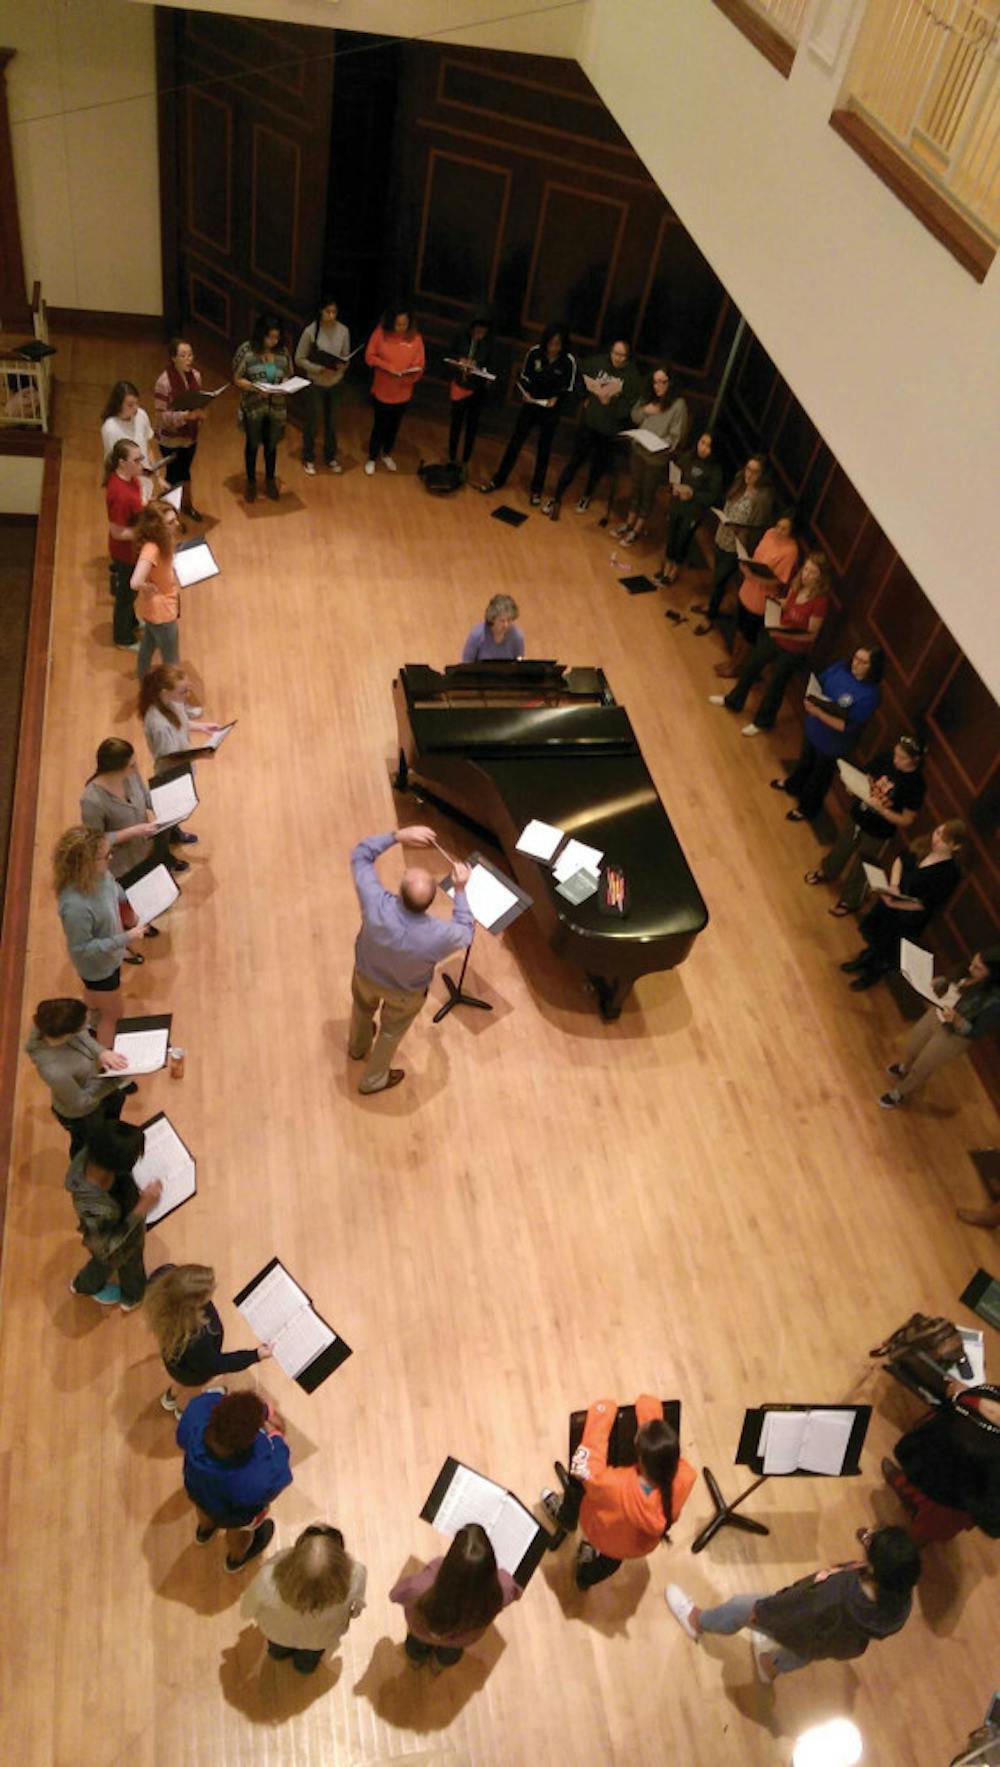 Mercer Women's Chamber Choir rehearse for the upcoming Thanksgiving Song concert, under the direction of Dr. Stanley Roberts. 